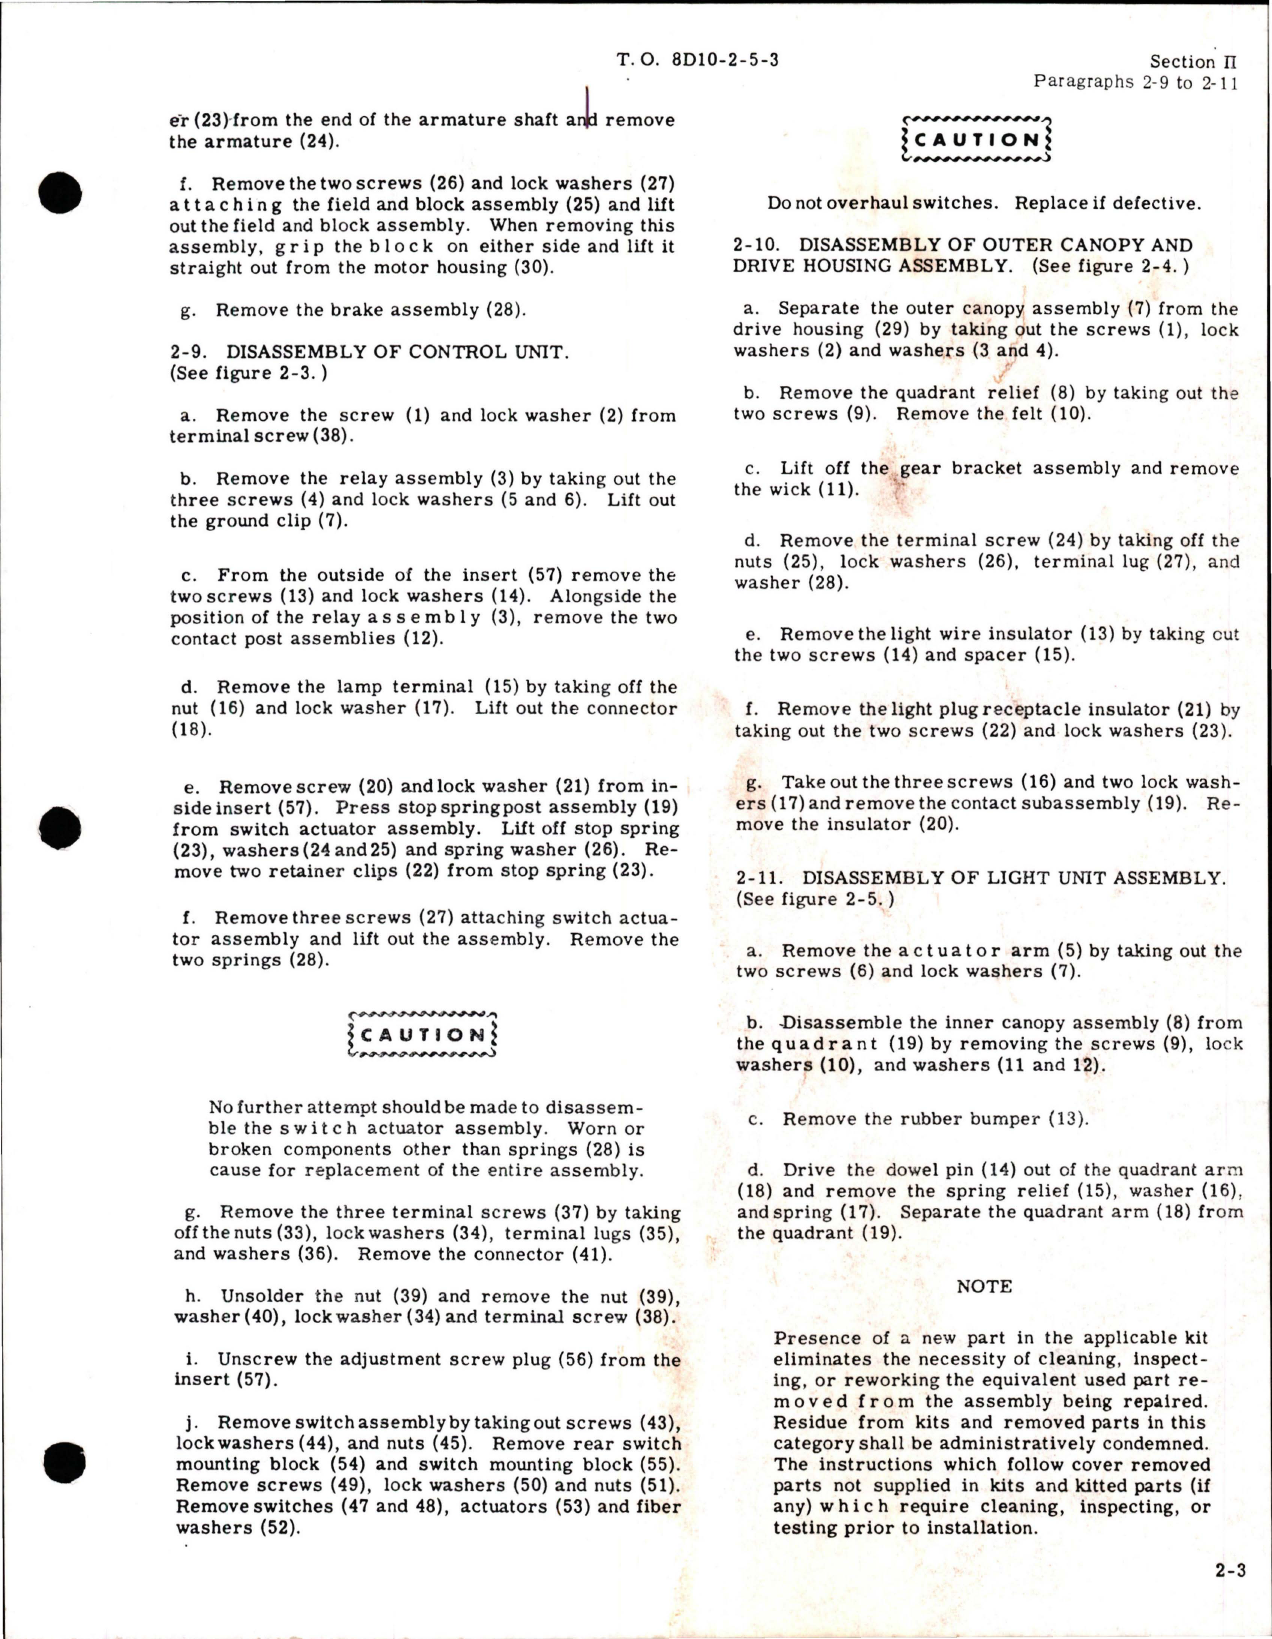 Sample page 9 from AirCorps Library document: Overhaul for Electrically Retractable Landing Light Assemblies - Part G-3800A Series - Change 2